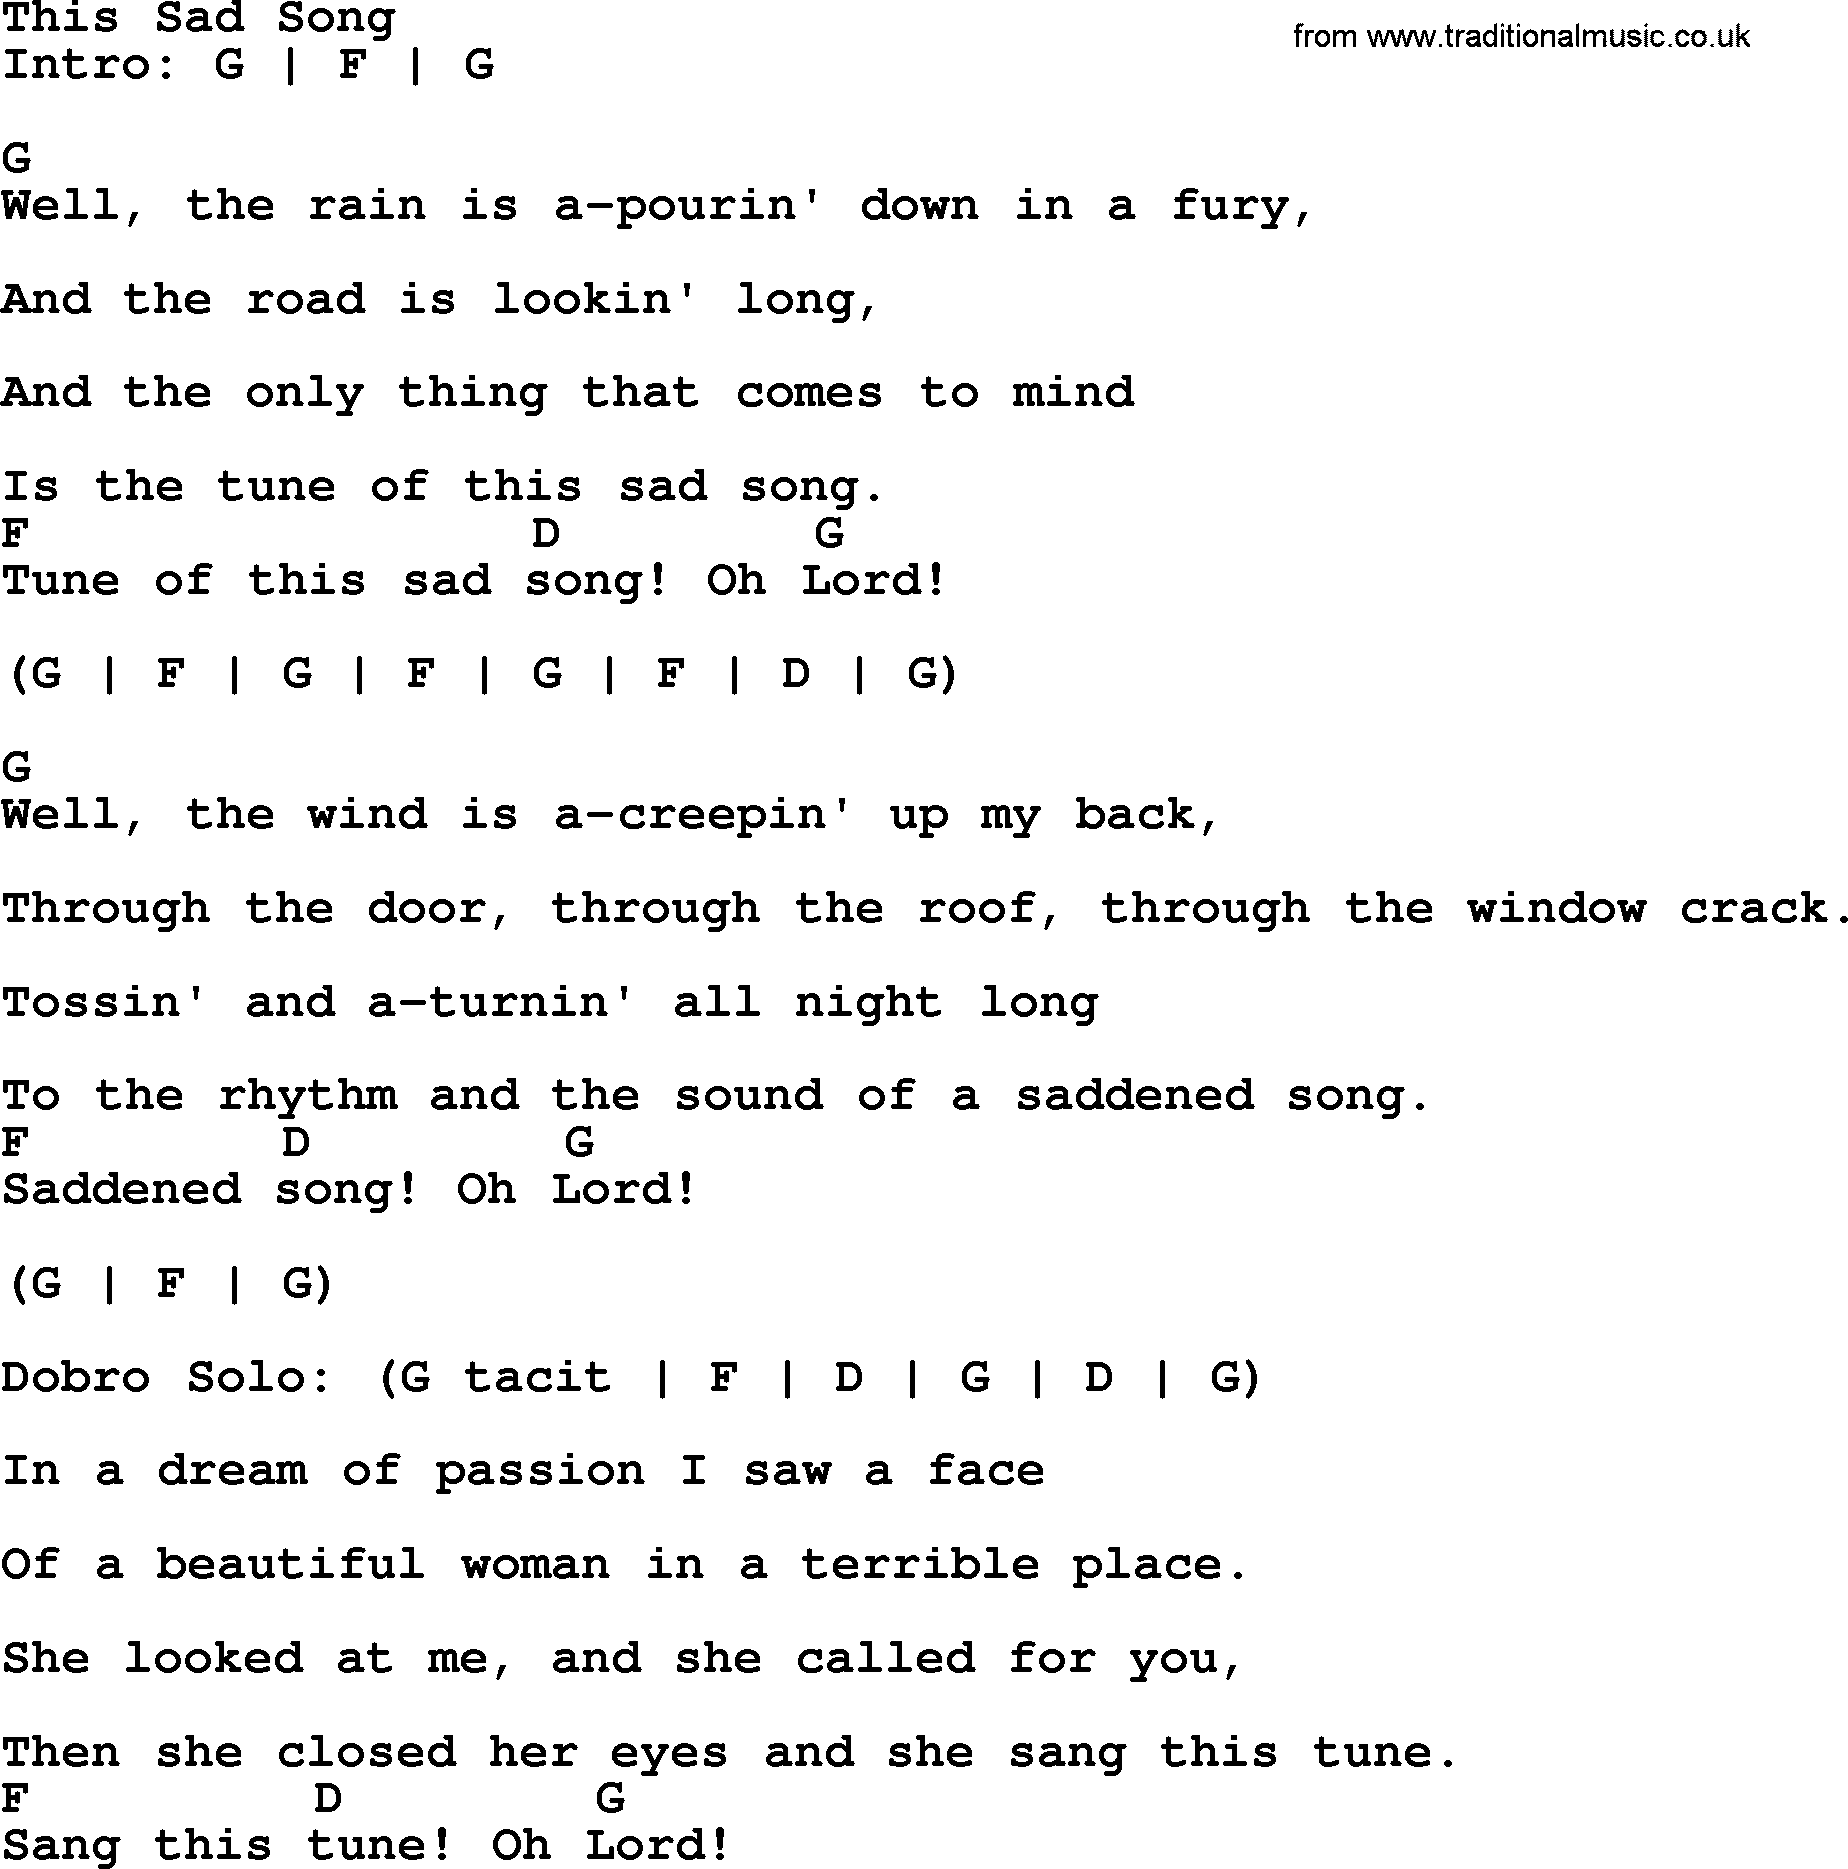 Bluegrass song: This Sad Song, lyrics and chords